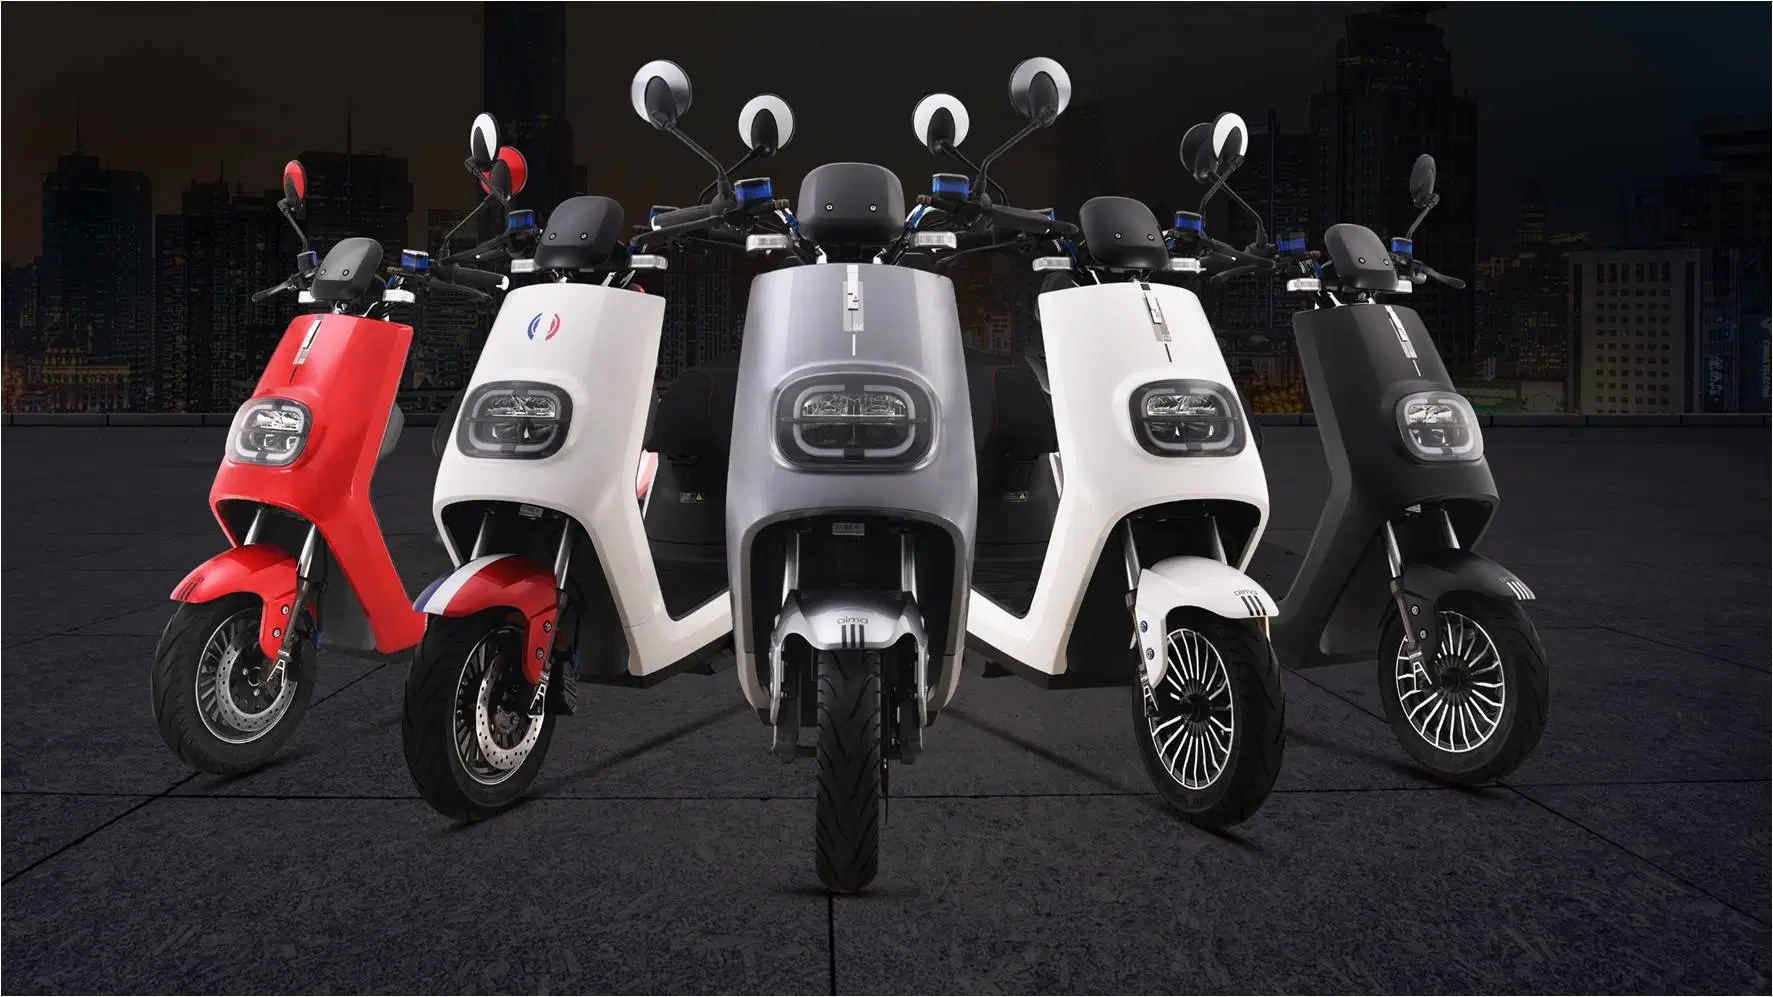 Aima New Popular Electric Motorcycle Model